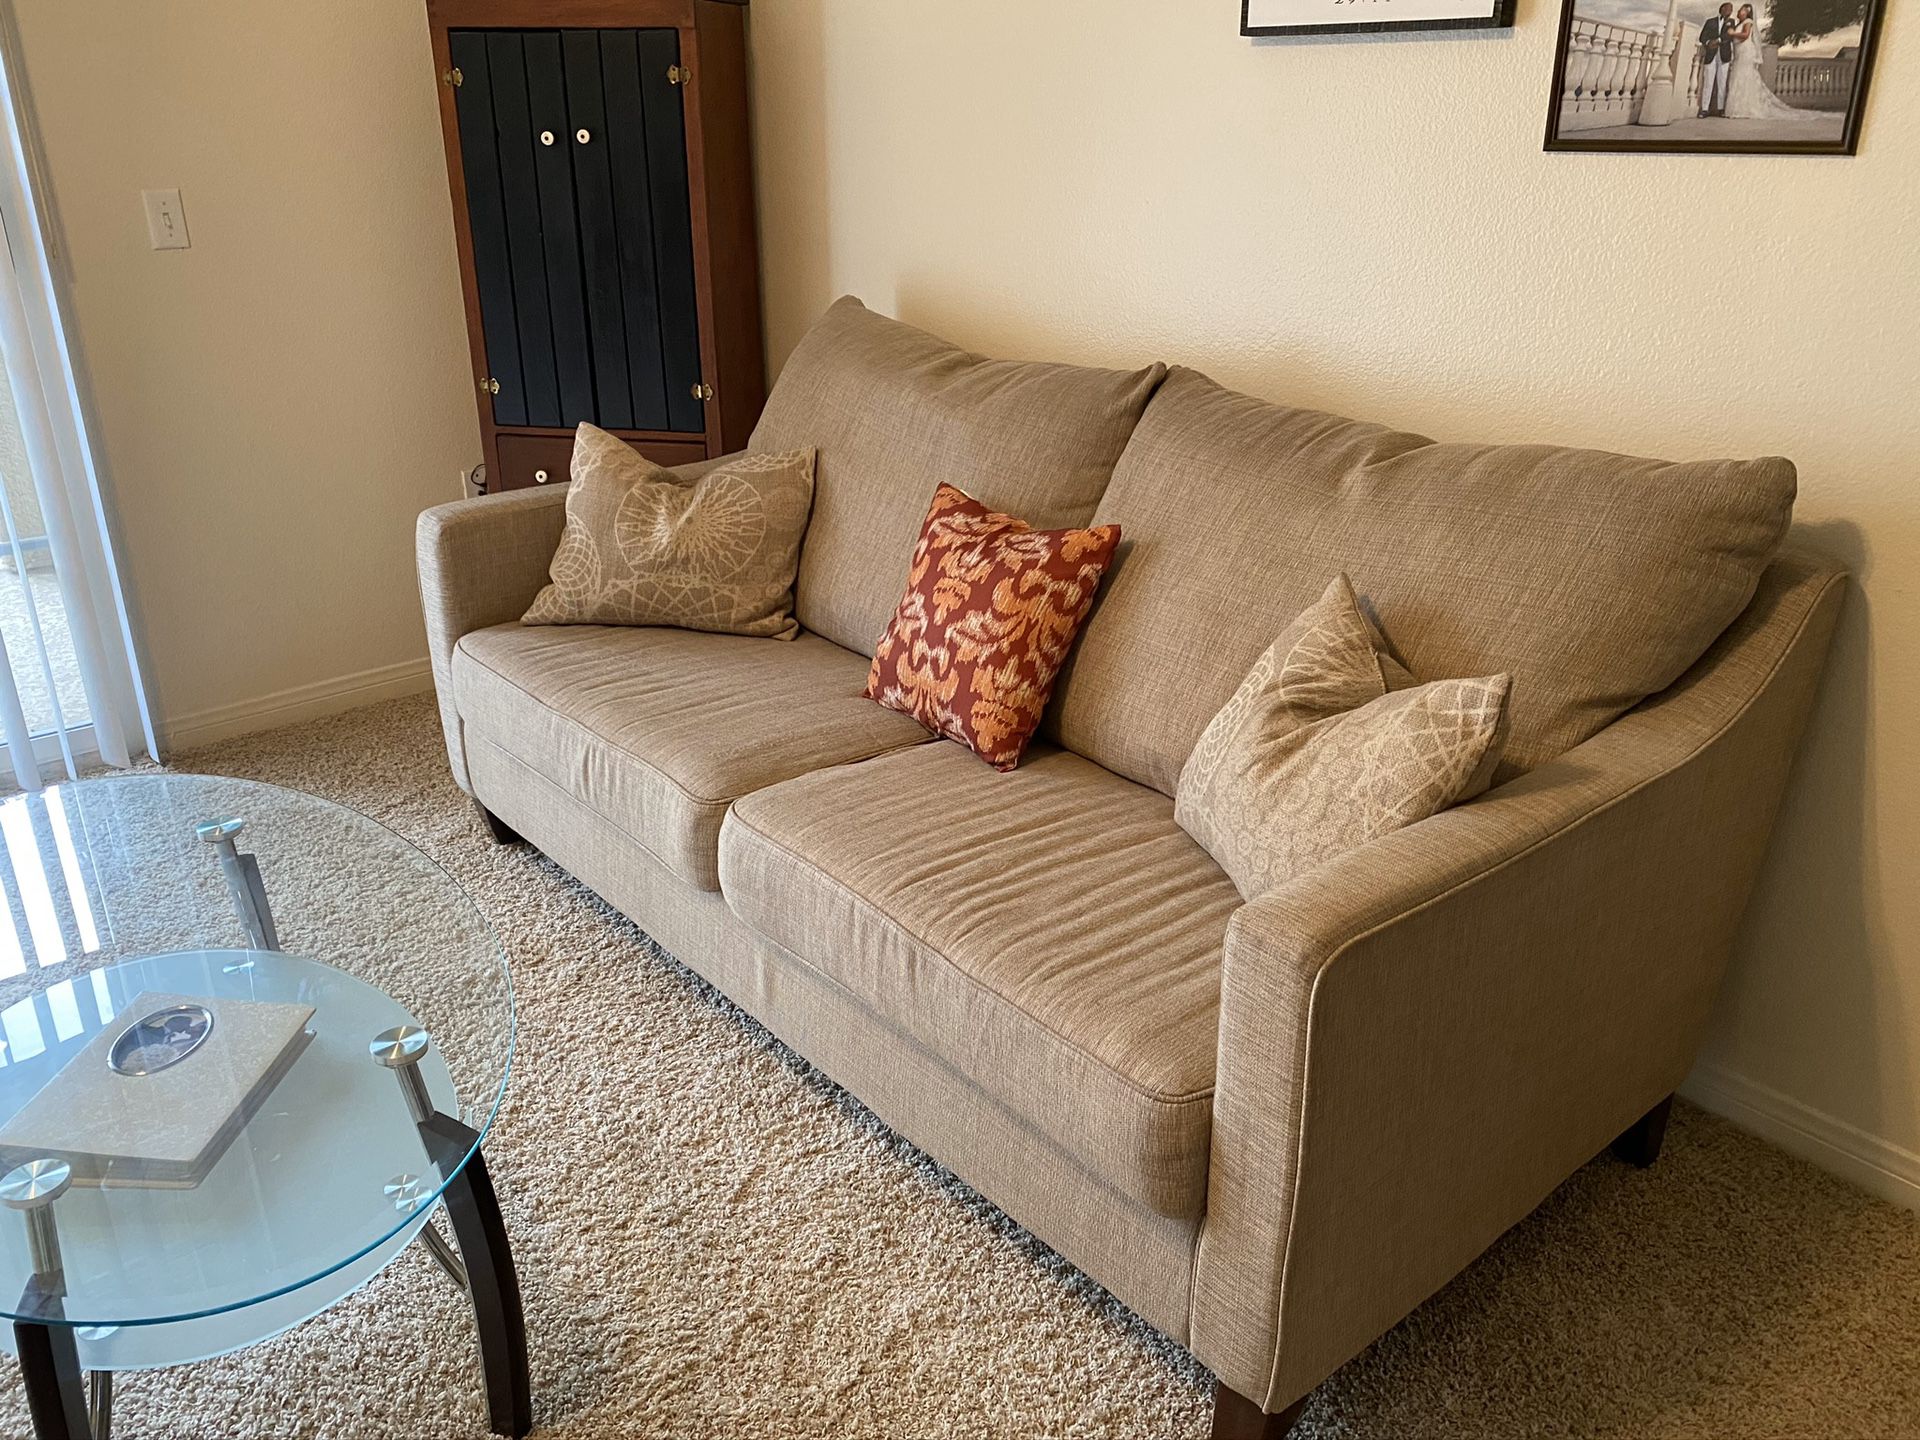 Living room furniture: Couch and Glass Coffee Table